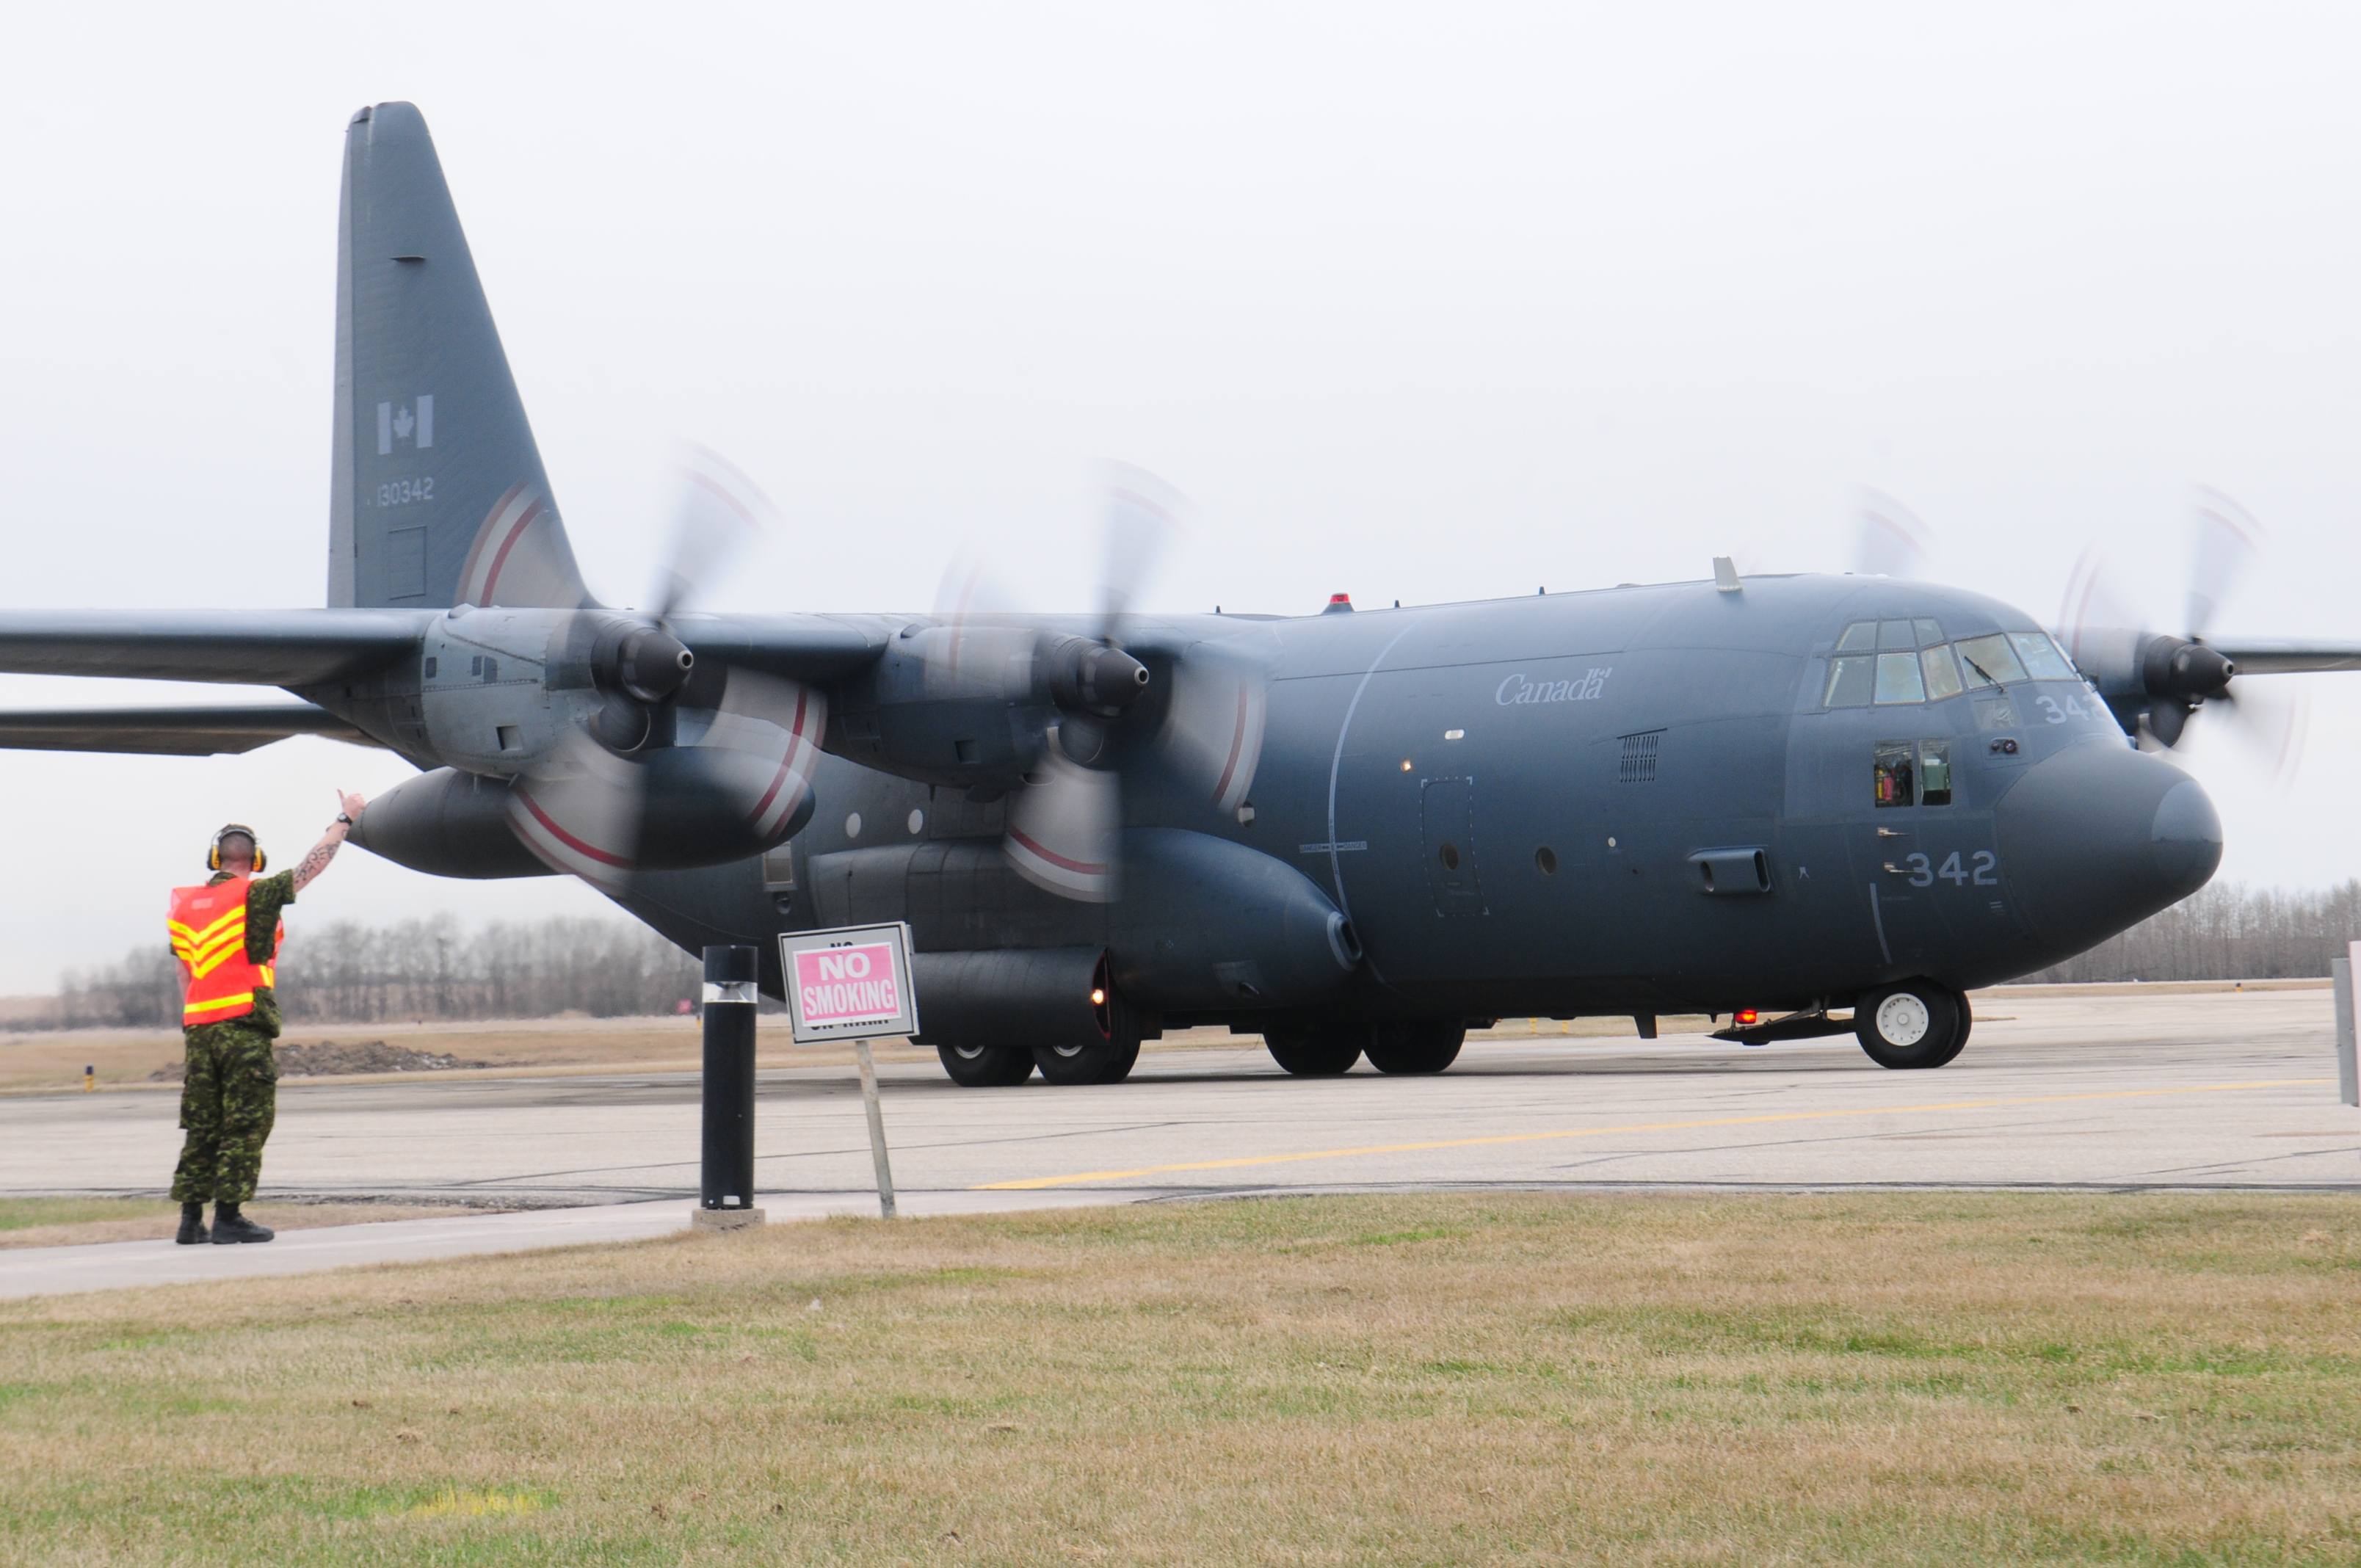 GIANT- A CC-130 Hercules was the main attraction this weekend as personnel from 435 ‘Chinthe’ Transport and Rescue Squadron and 17 Wing Winnipeg conducted a simulated major search and rescue deployment and training exercise out of the Red Deer Regional Airport.